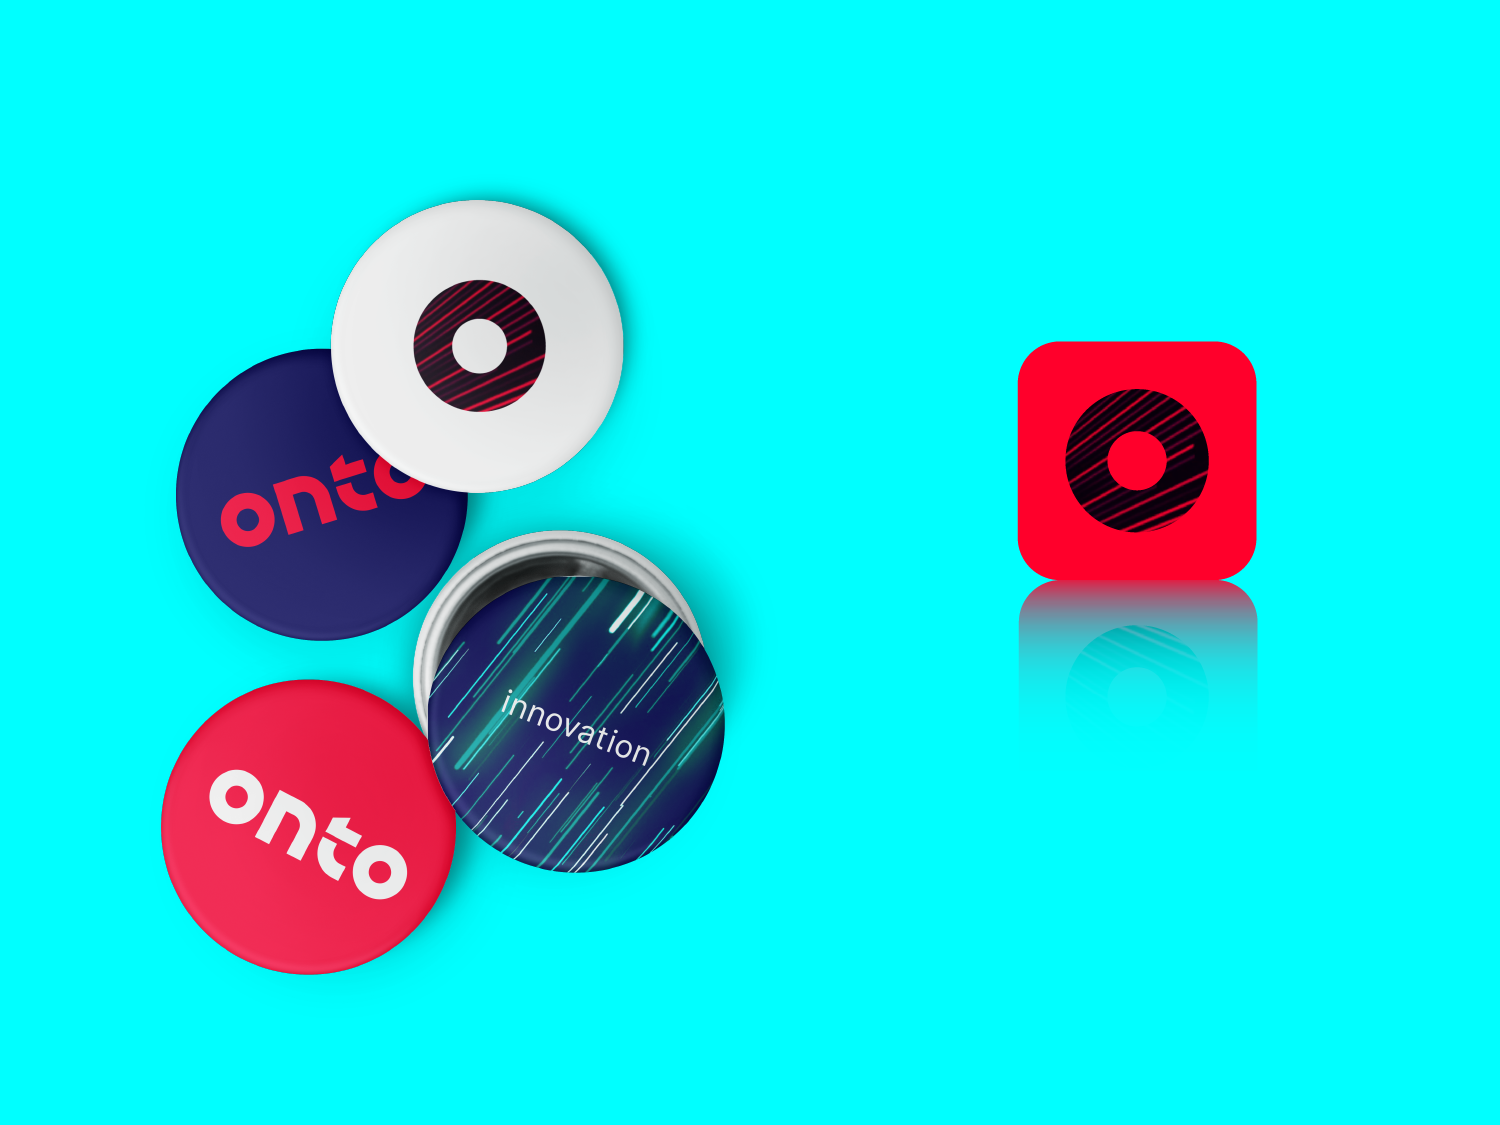 Onto Innovation buttons and app icon